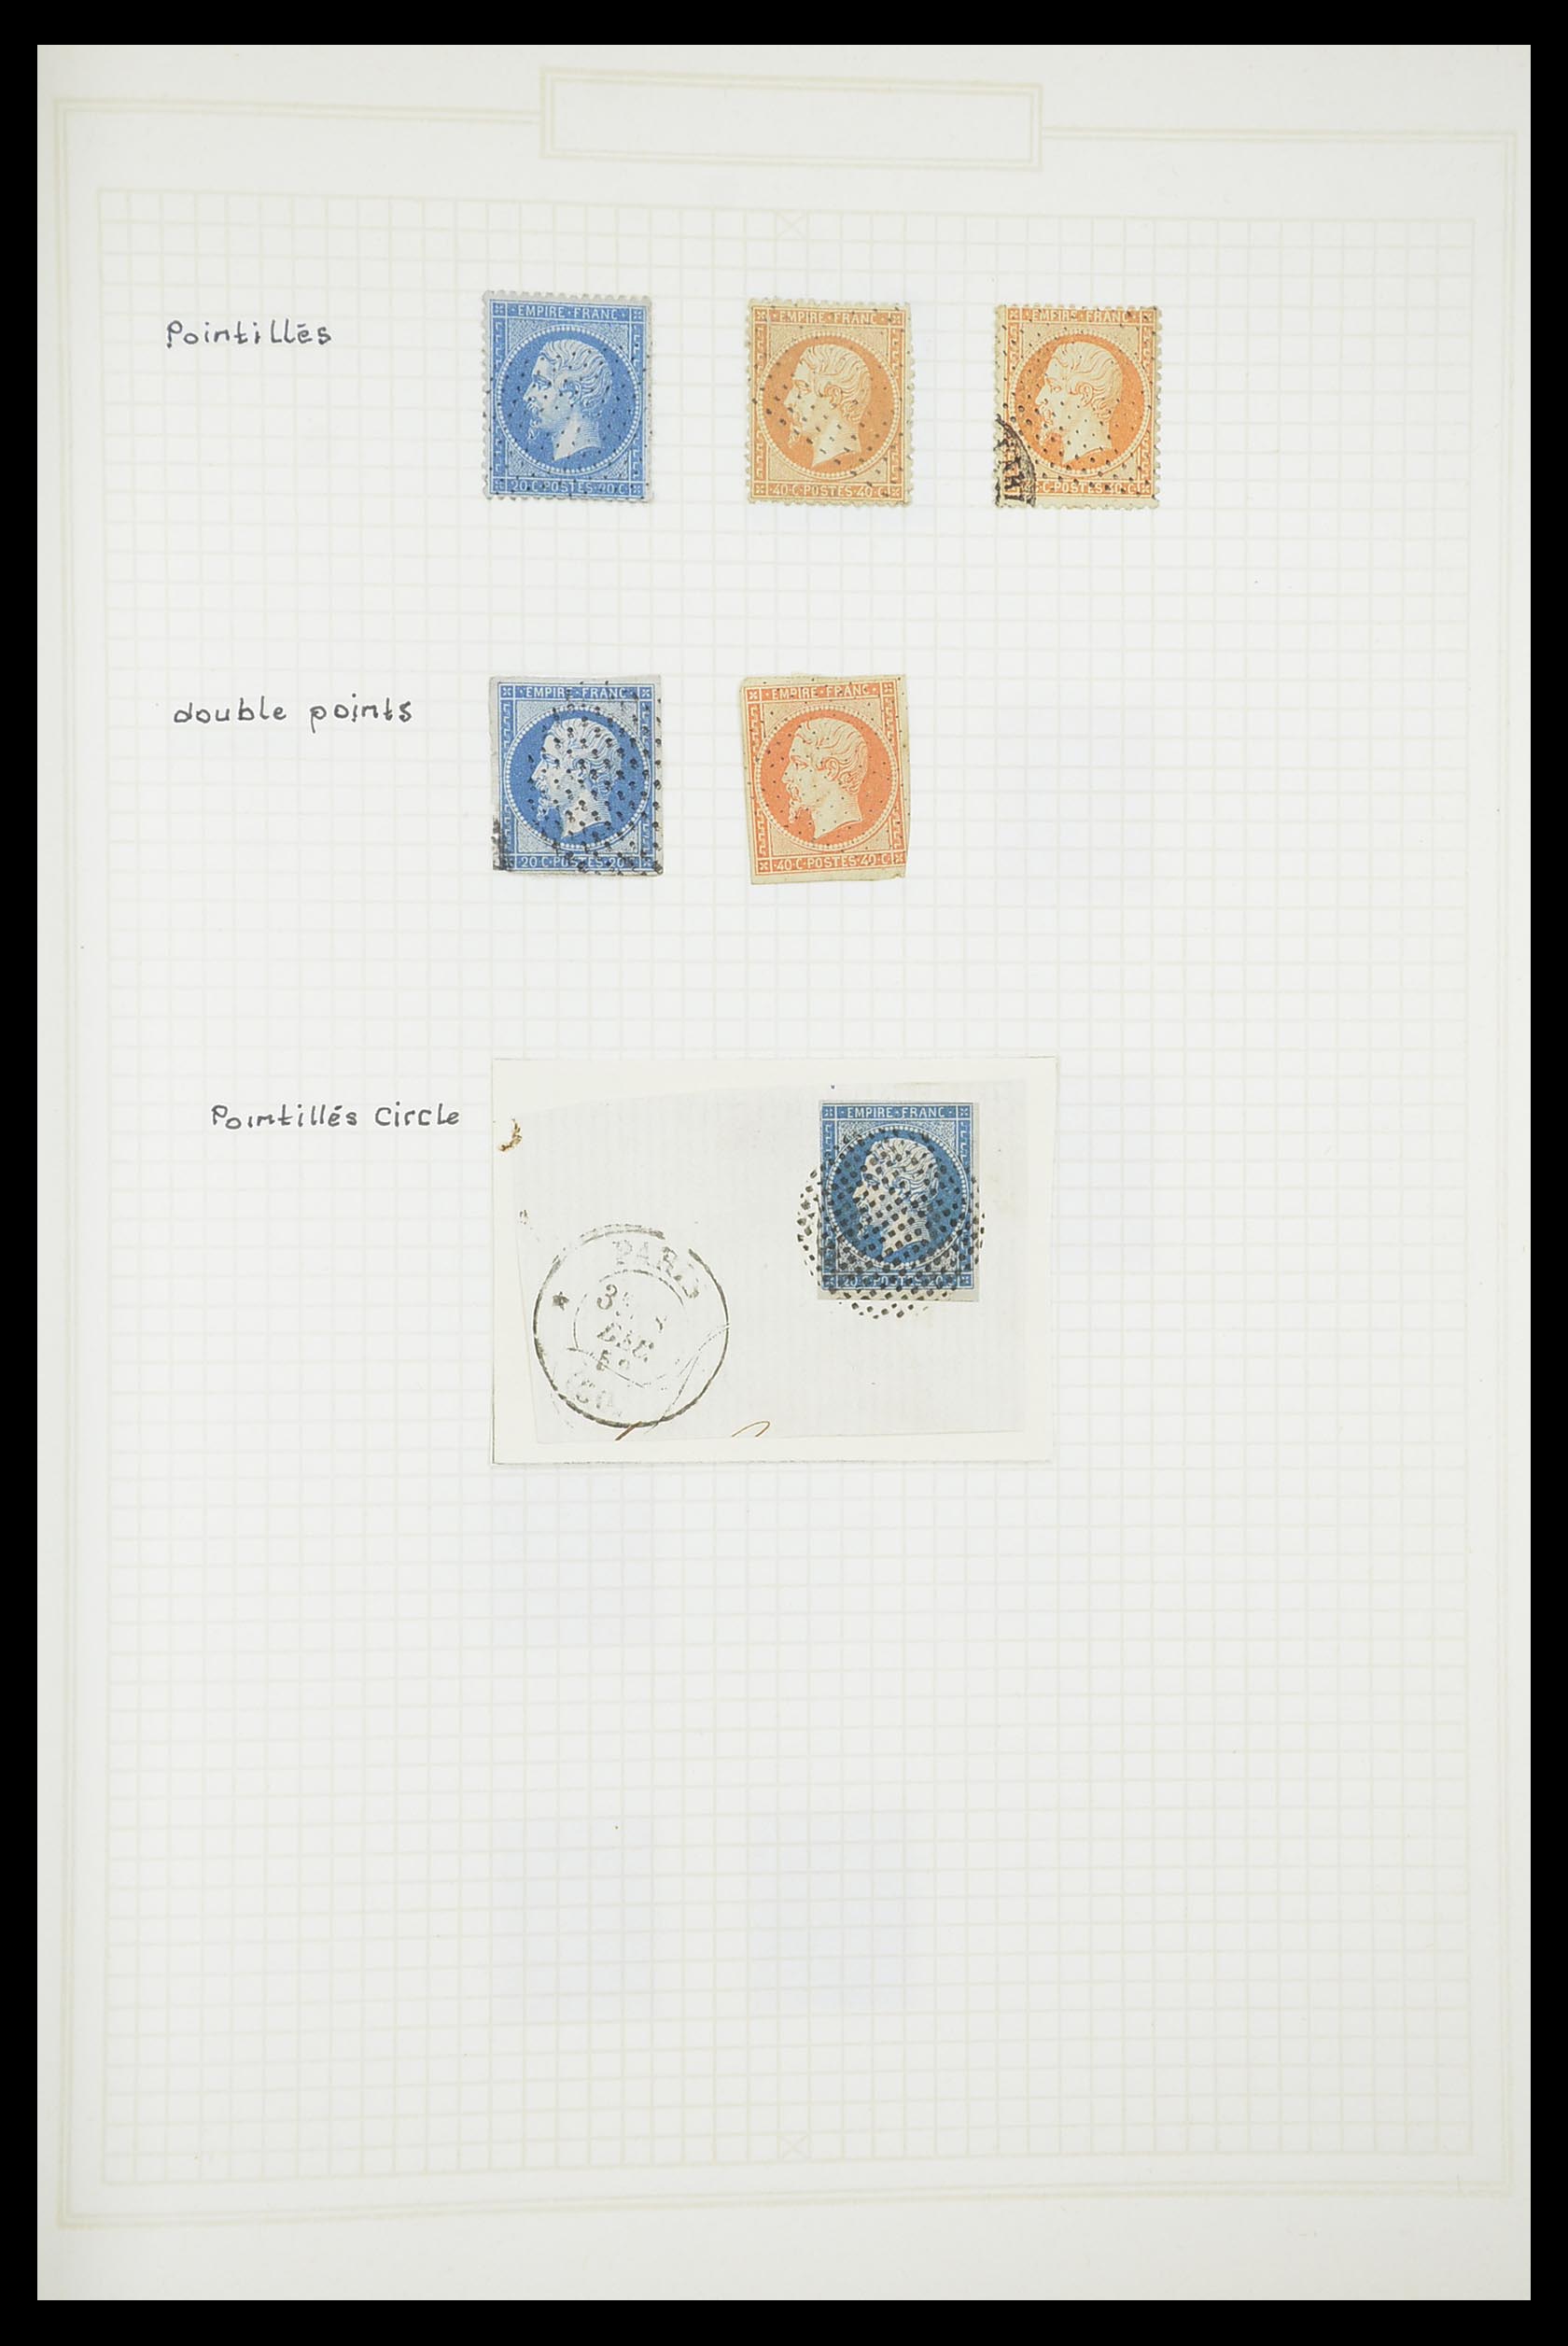 33851 022 - Stamp collection 33851 France classic cancels.